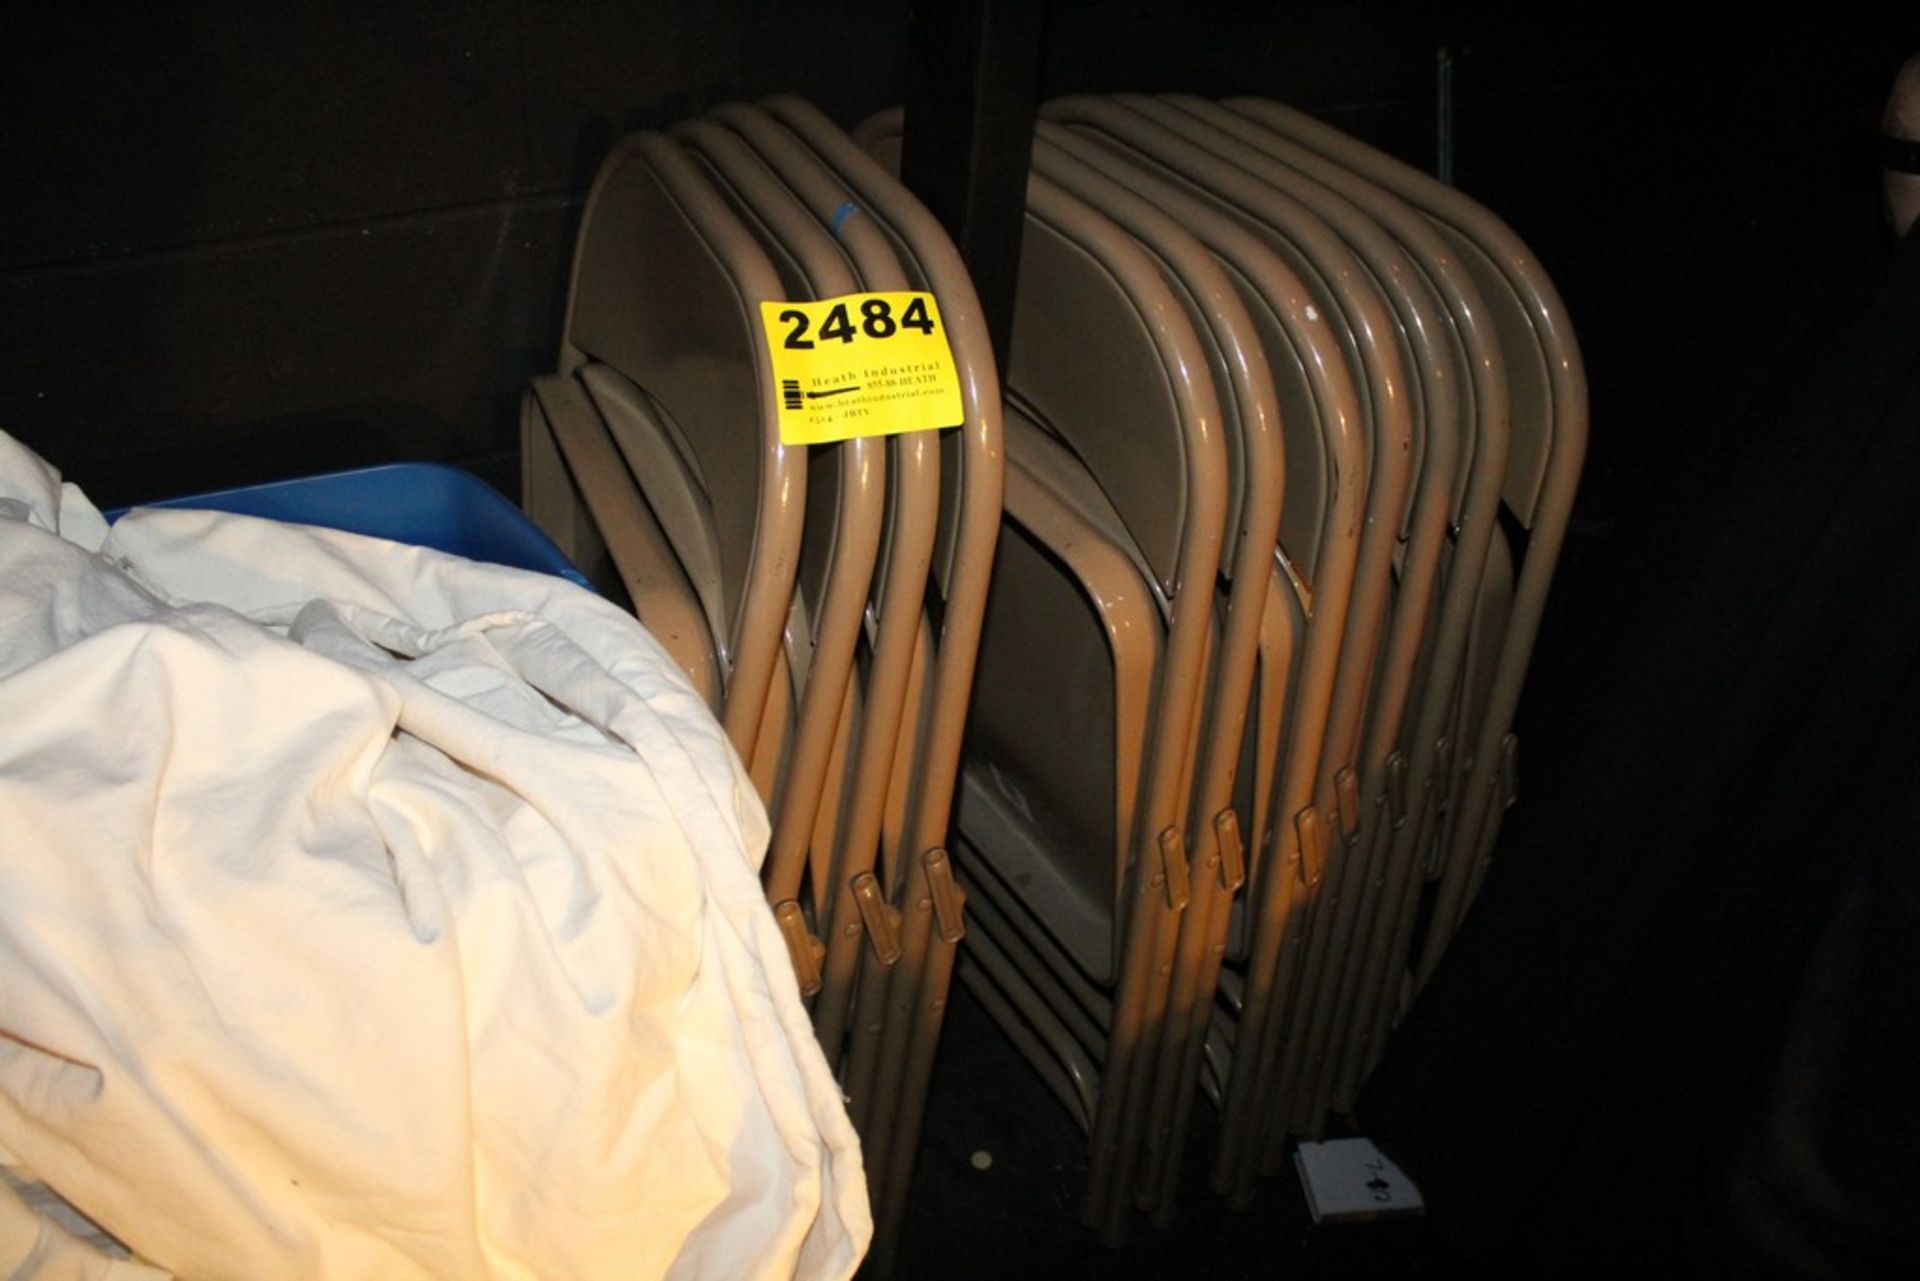 Metal Folding Chairs (11 total)